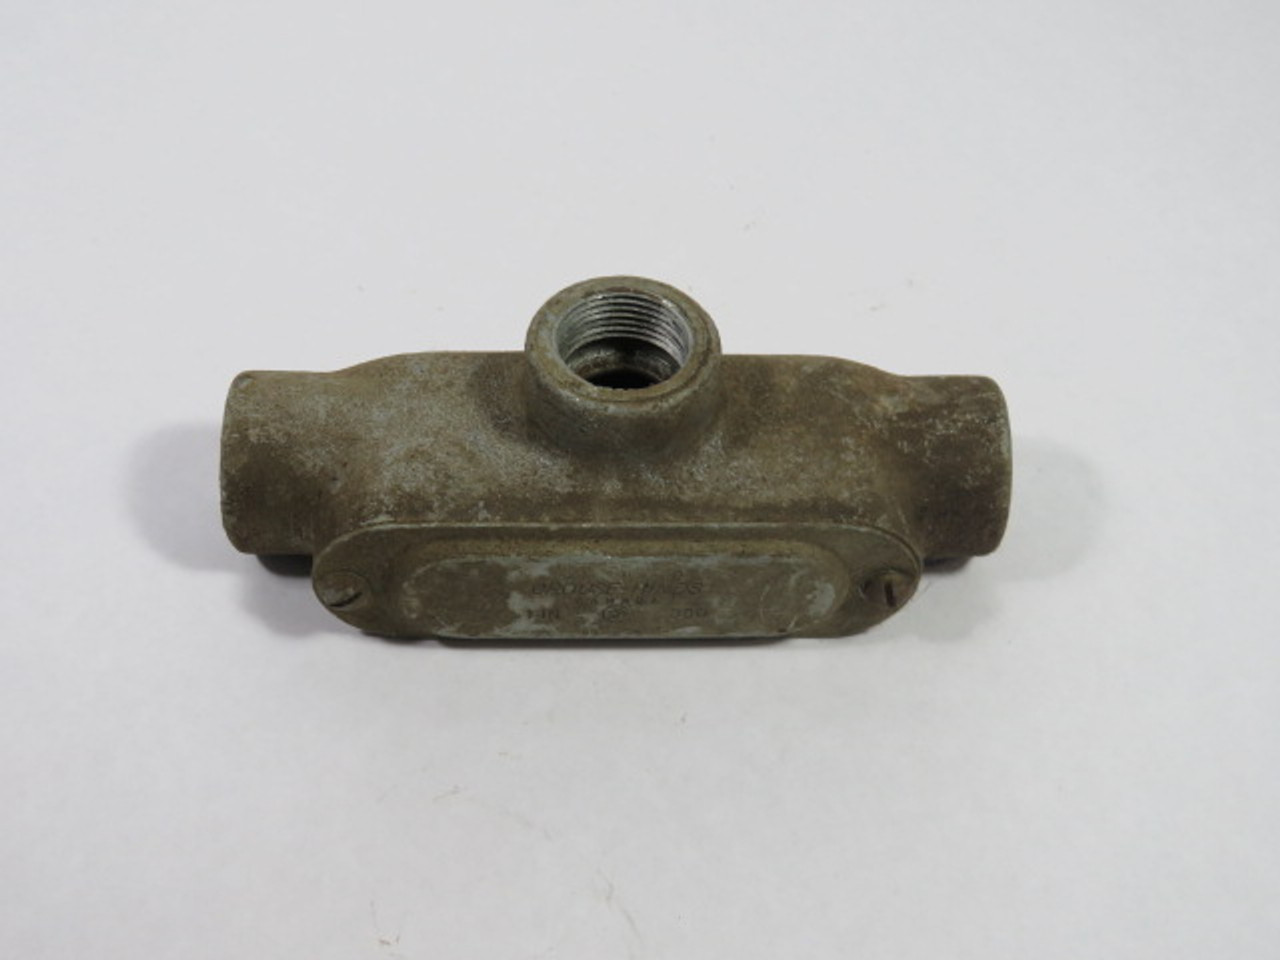 Crouse-Hinds T38 Conduit Body W/ Cover 3-Hole 1" NPT Threaded USED